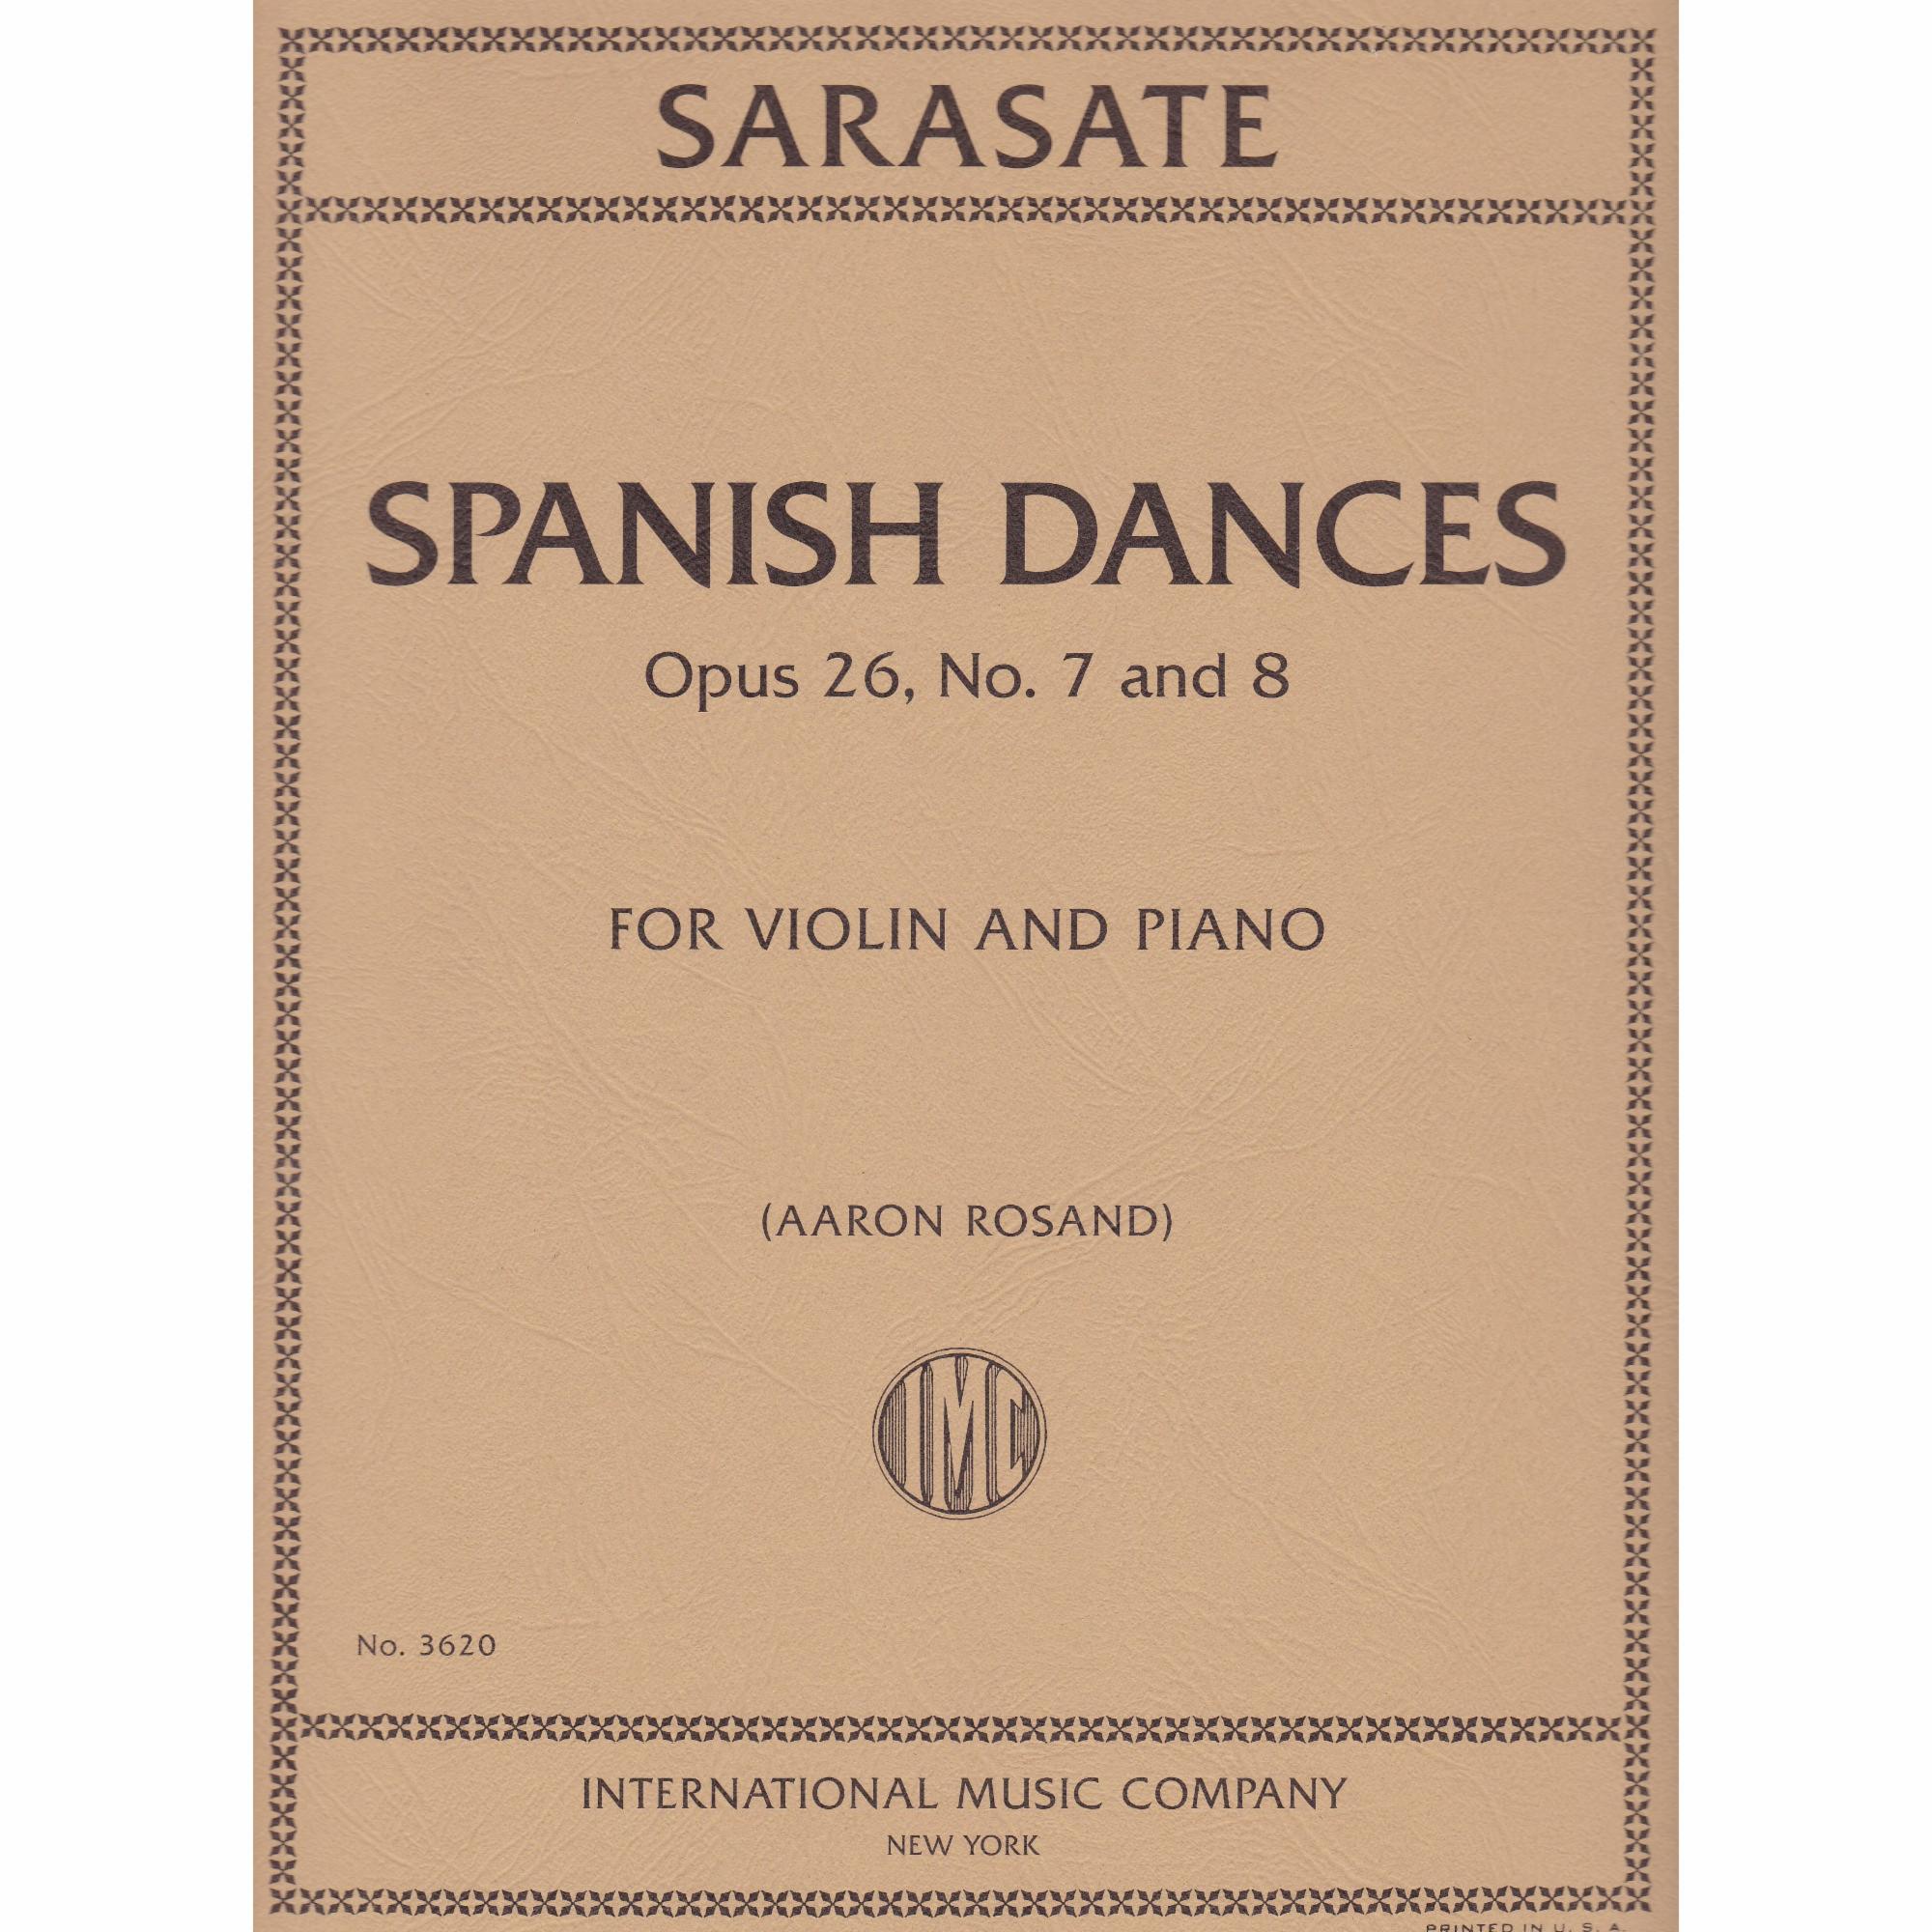 Spanish Dances for Violin and Piano, Op. 26, Nos. 7 and 8